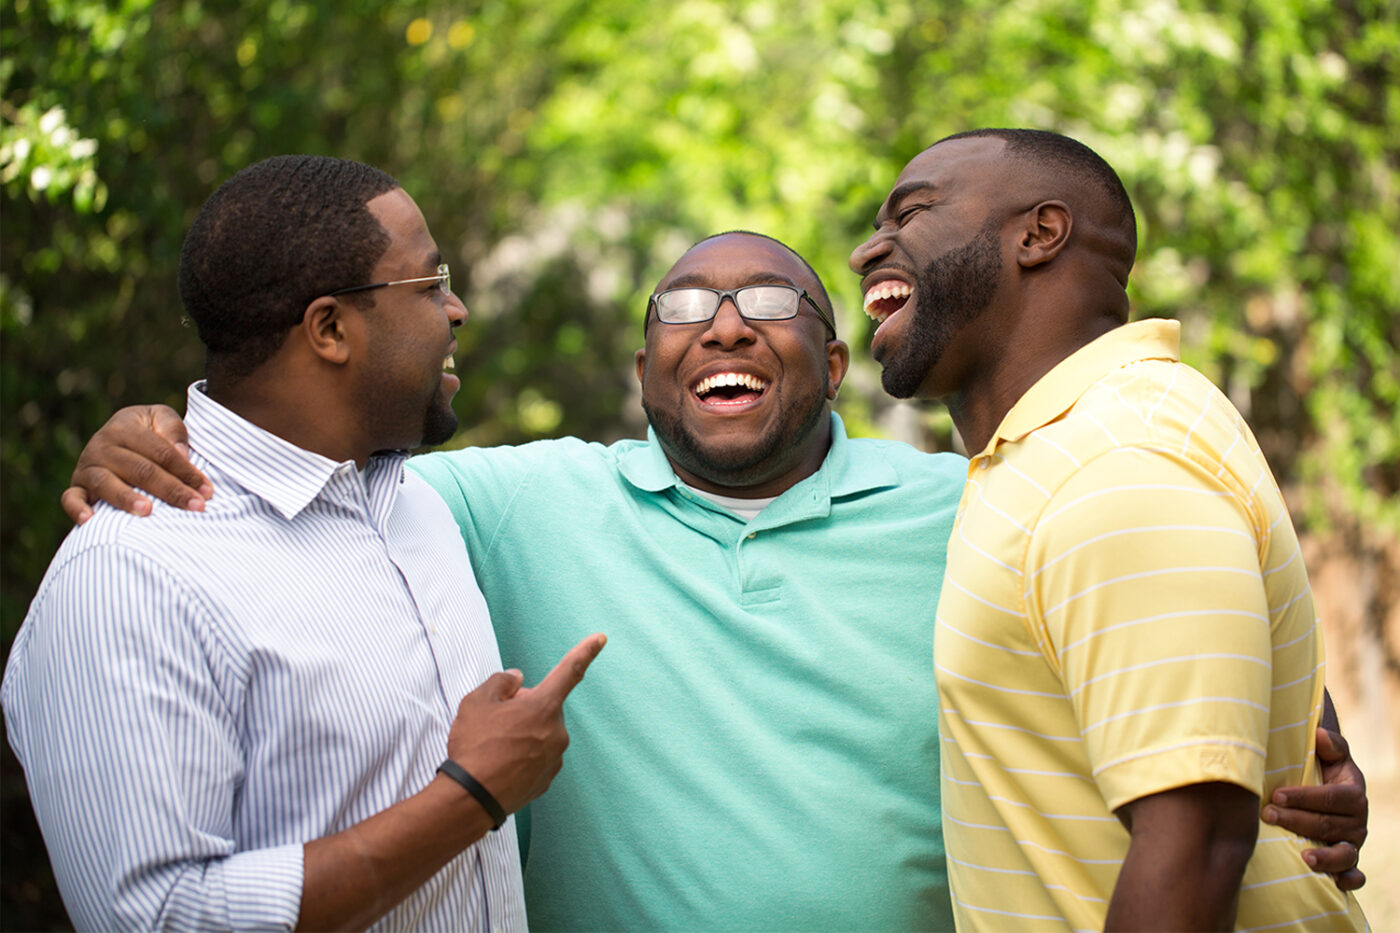 group of men talking and laughing